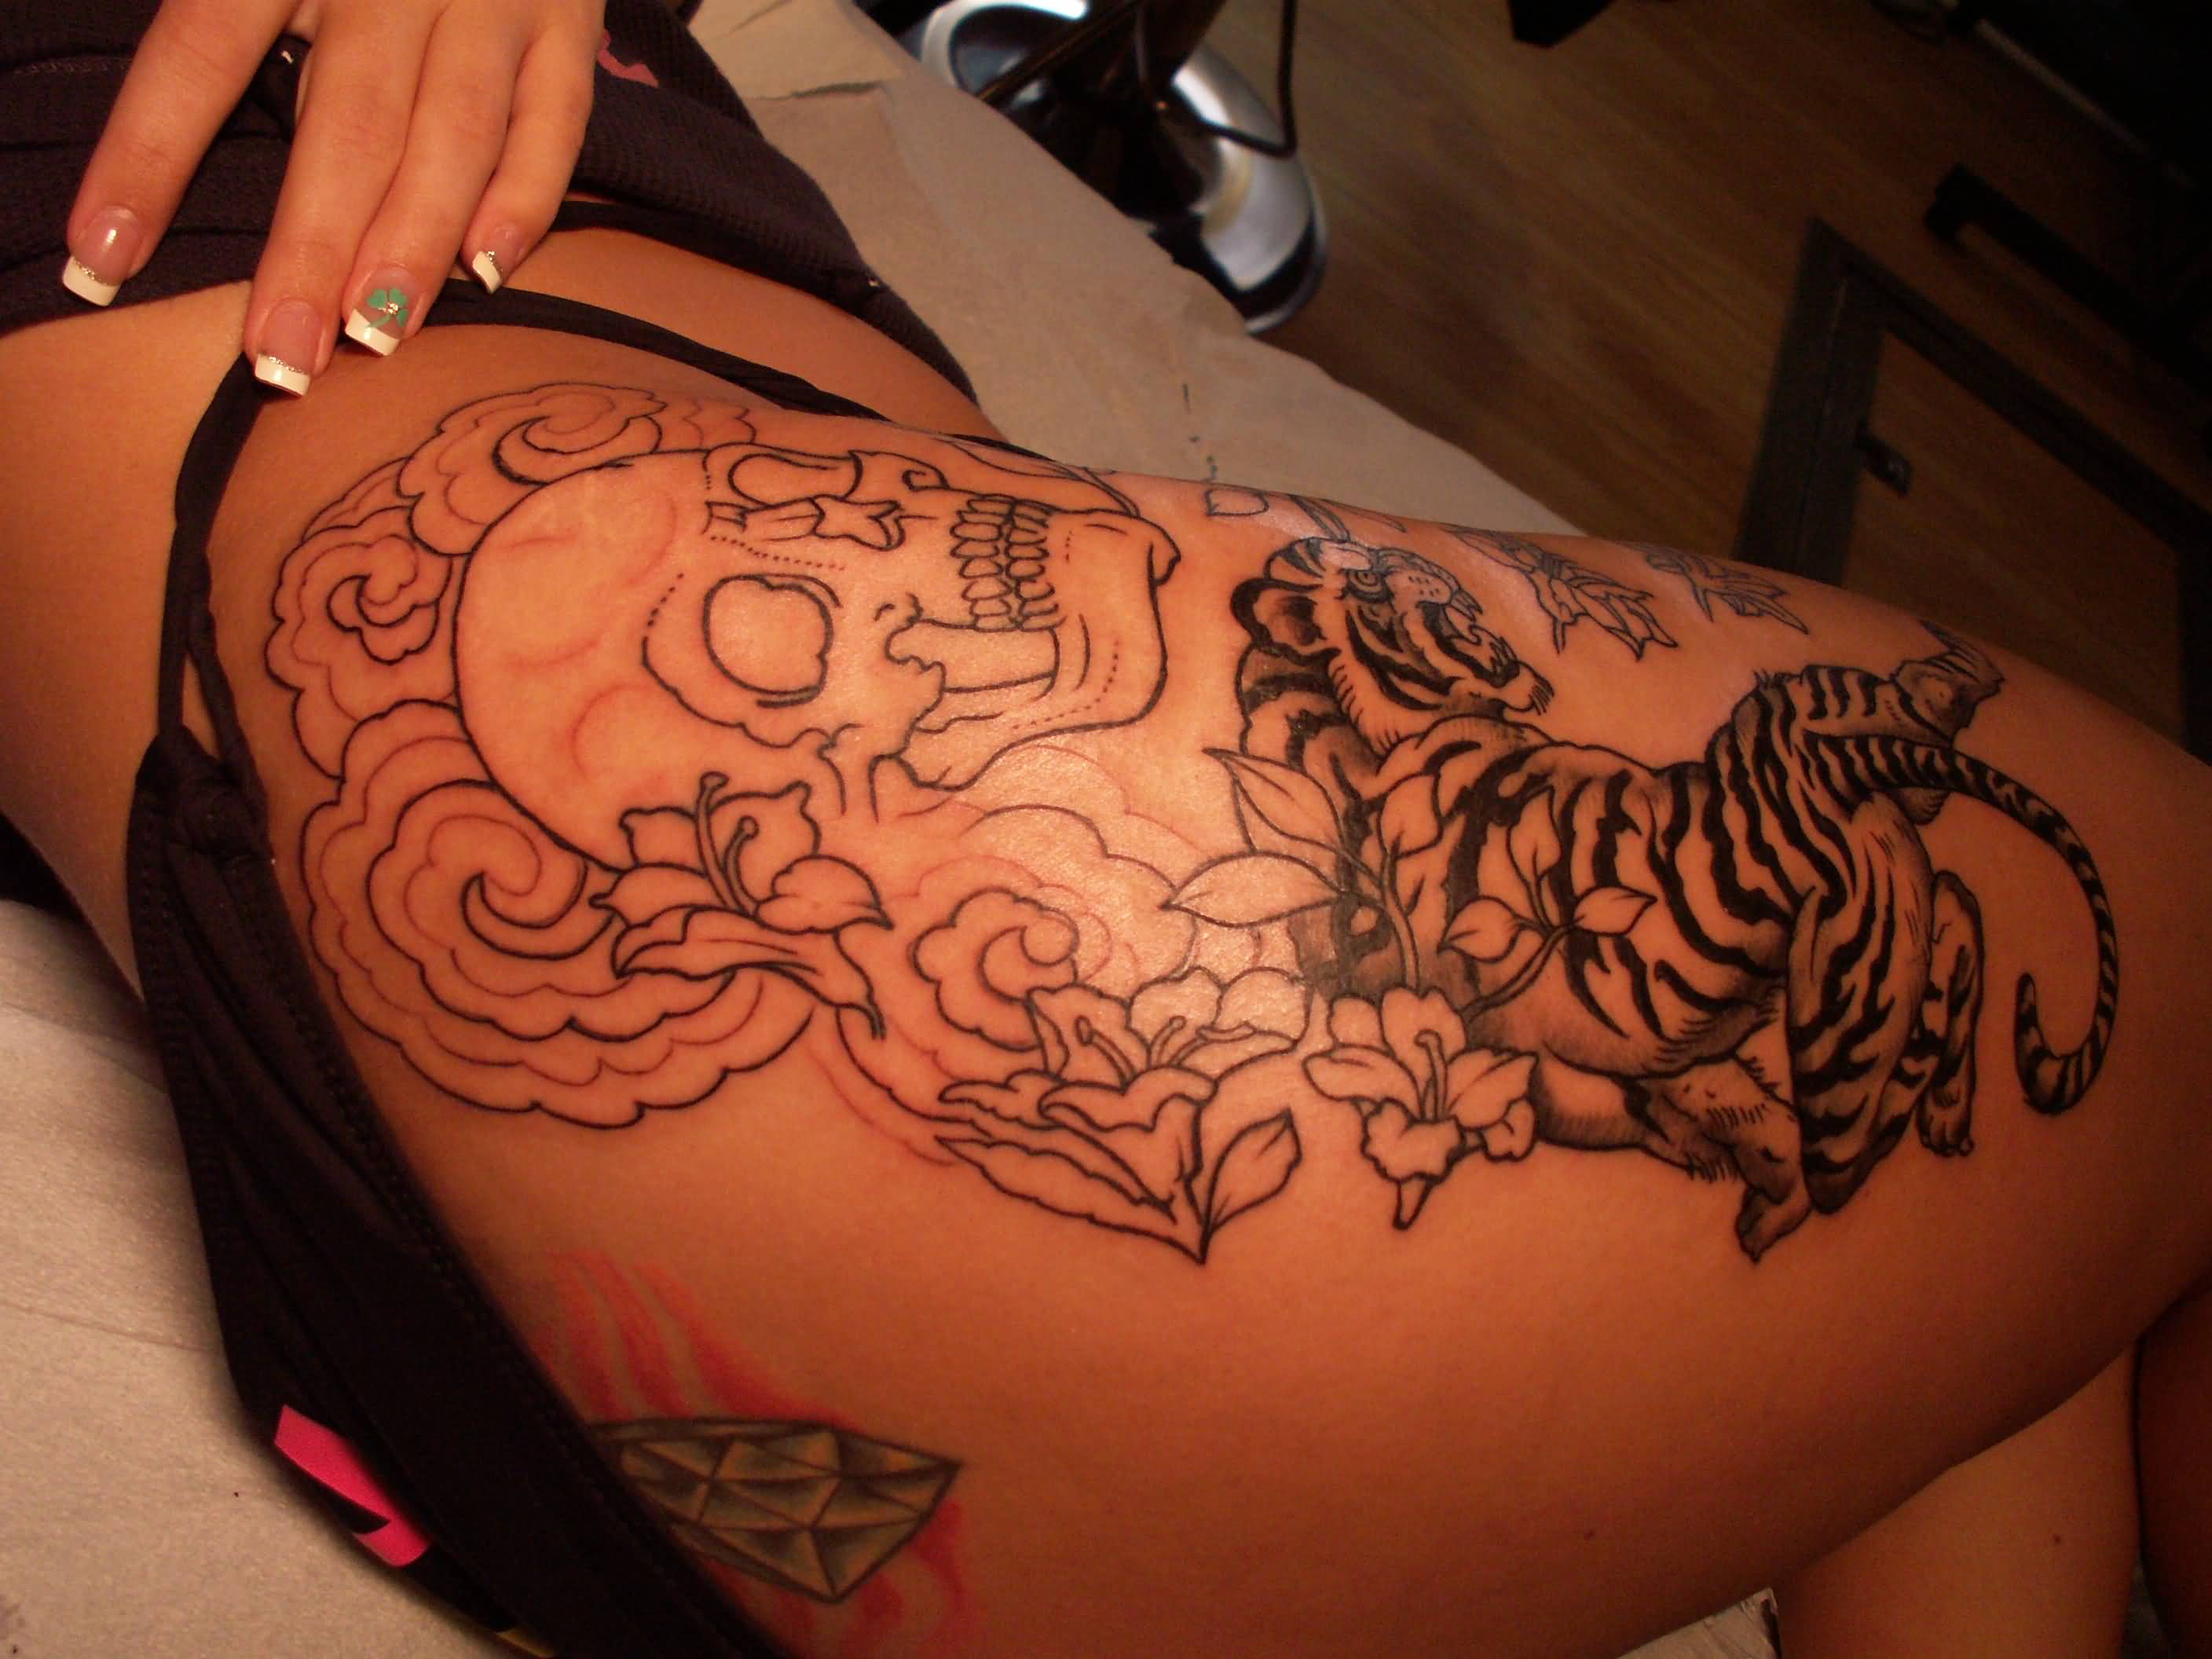 Outline Skull And Tiger Tattoo On Thigh.